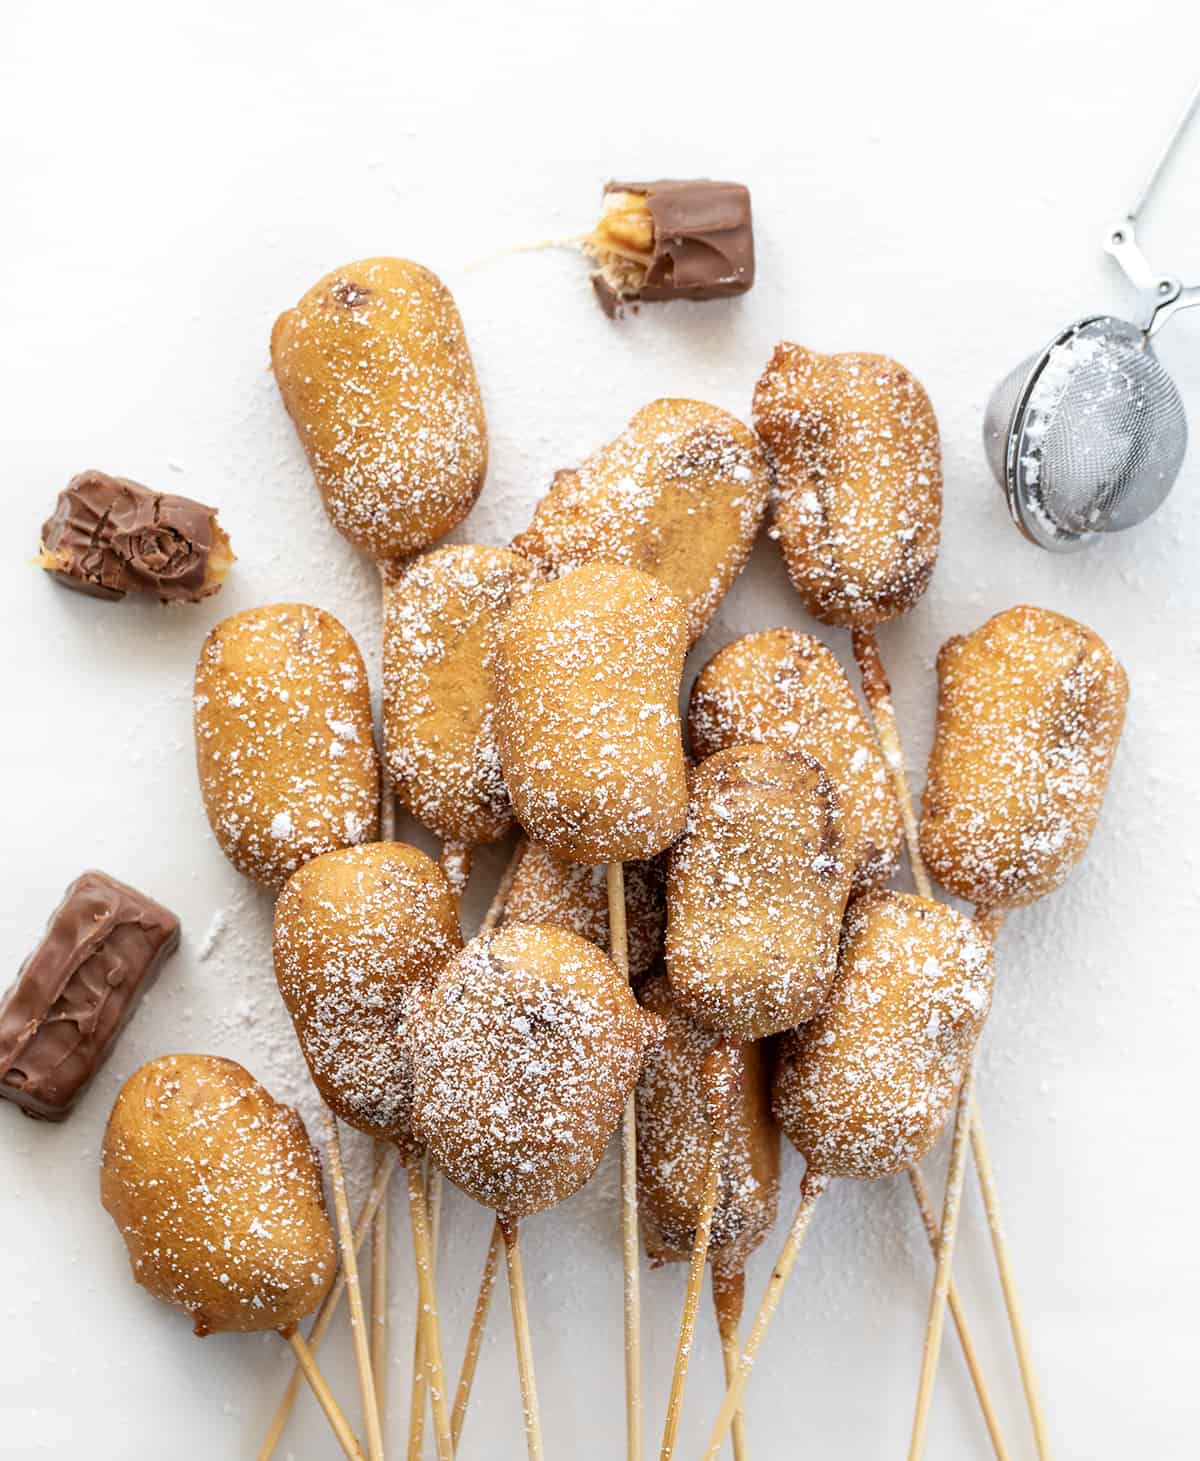 Several Deep Fried Snickers Still on the Skewer on a White Counter.